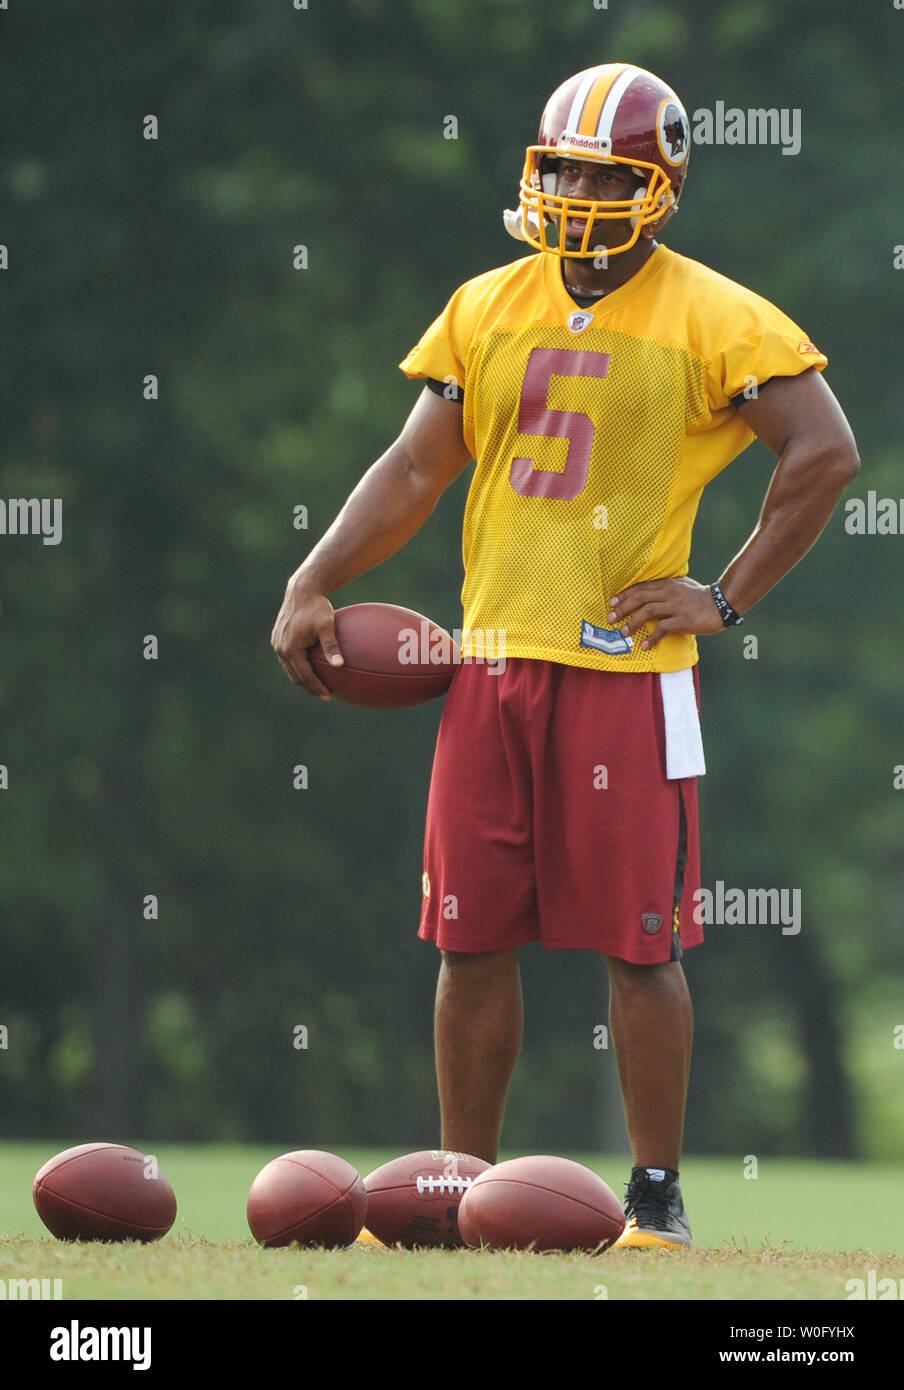 Washington Redskins quarterback Donovan McNabb pauses during a drill at the last day of Redskins training camp at Redskins Park in Ashburn, Virginia, August 19, 2010. UPI/Kevin Dietsch Stock Photo